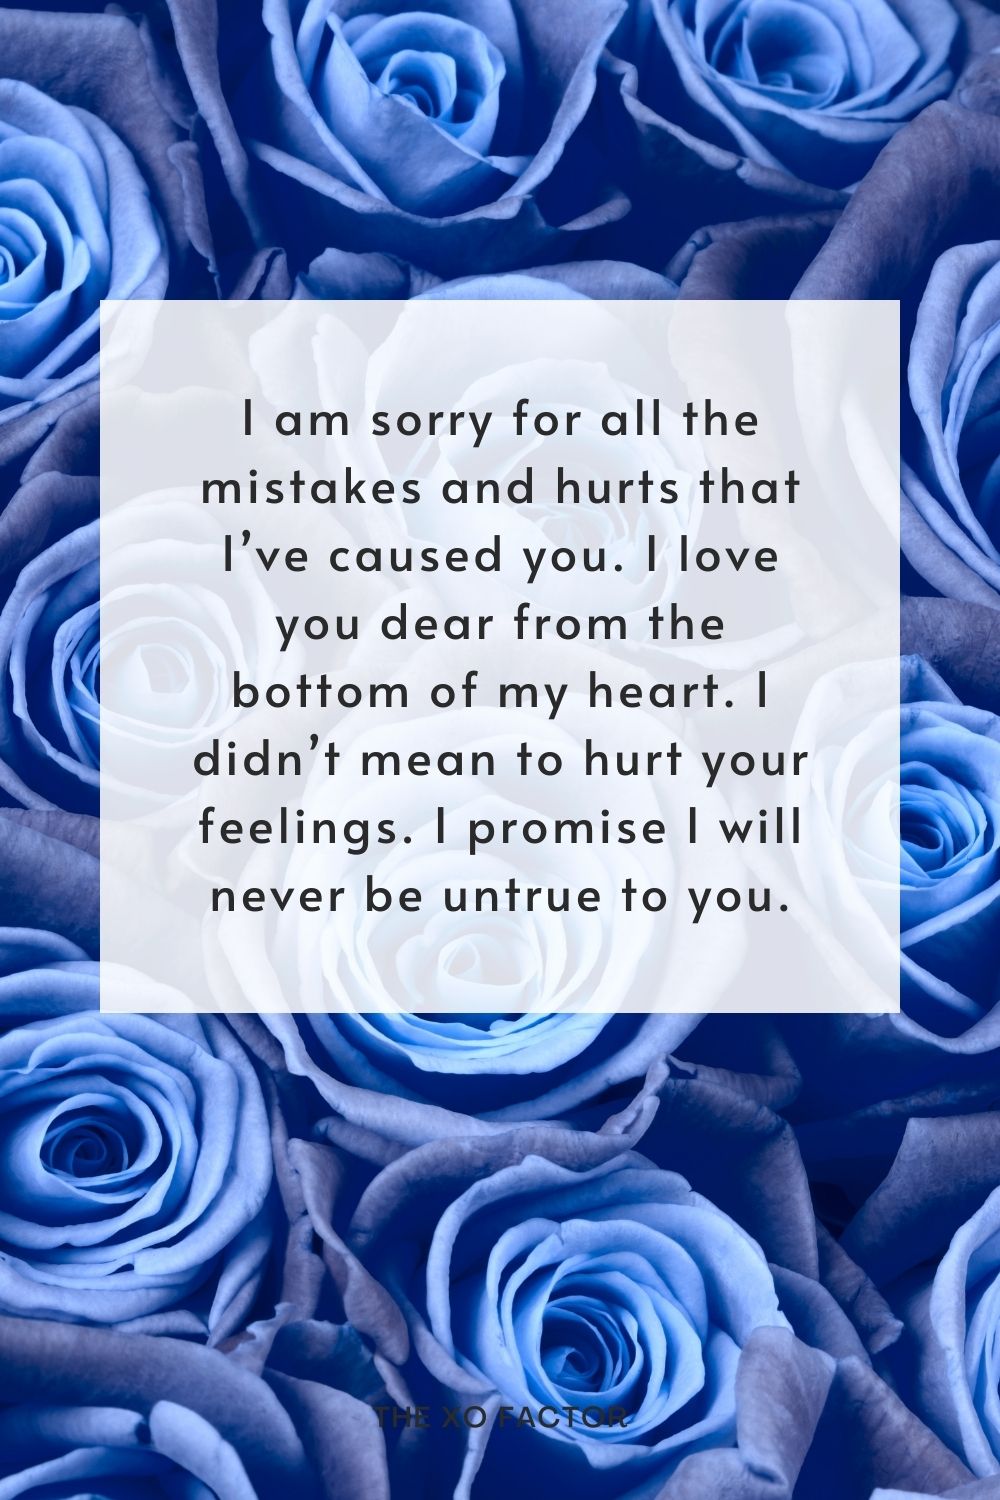 I am sorry for all the mistakes and hurts that I’ve caused you. I love you dear from the bottom of my heart. I didn’t mean to hurt your feelings. I promise I will never be untrue to you.